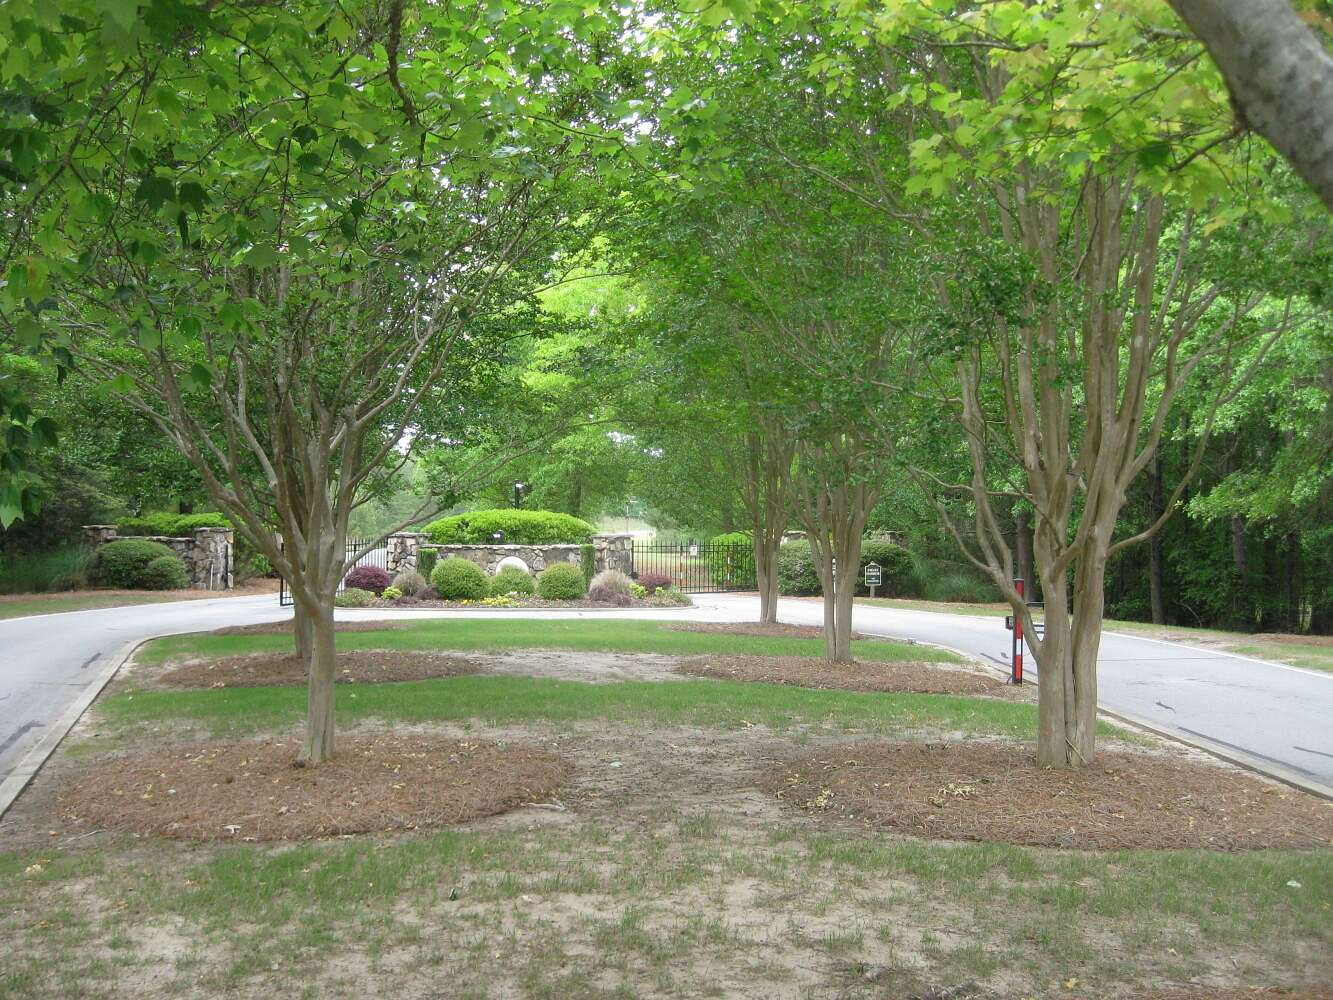 0.5 Acres of Residential Land for Sale in Greenwood, South Carolina